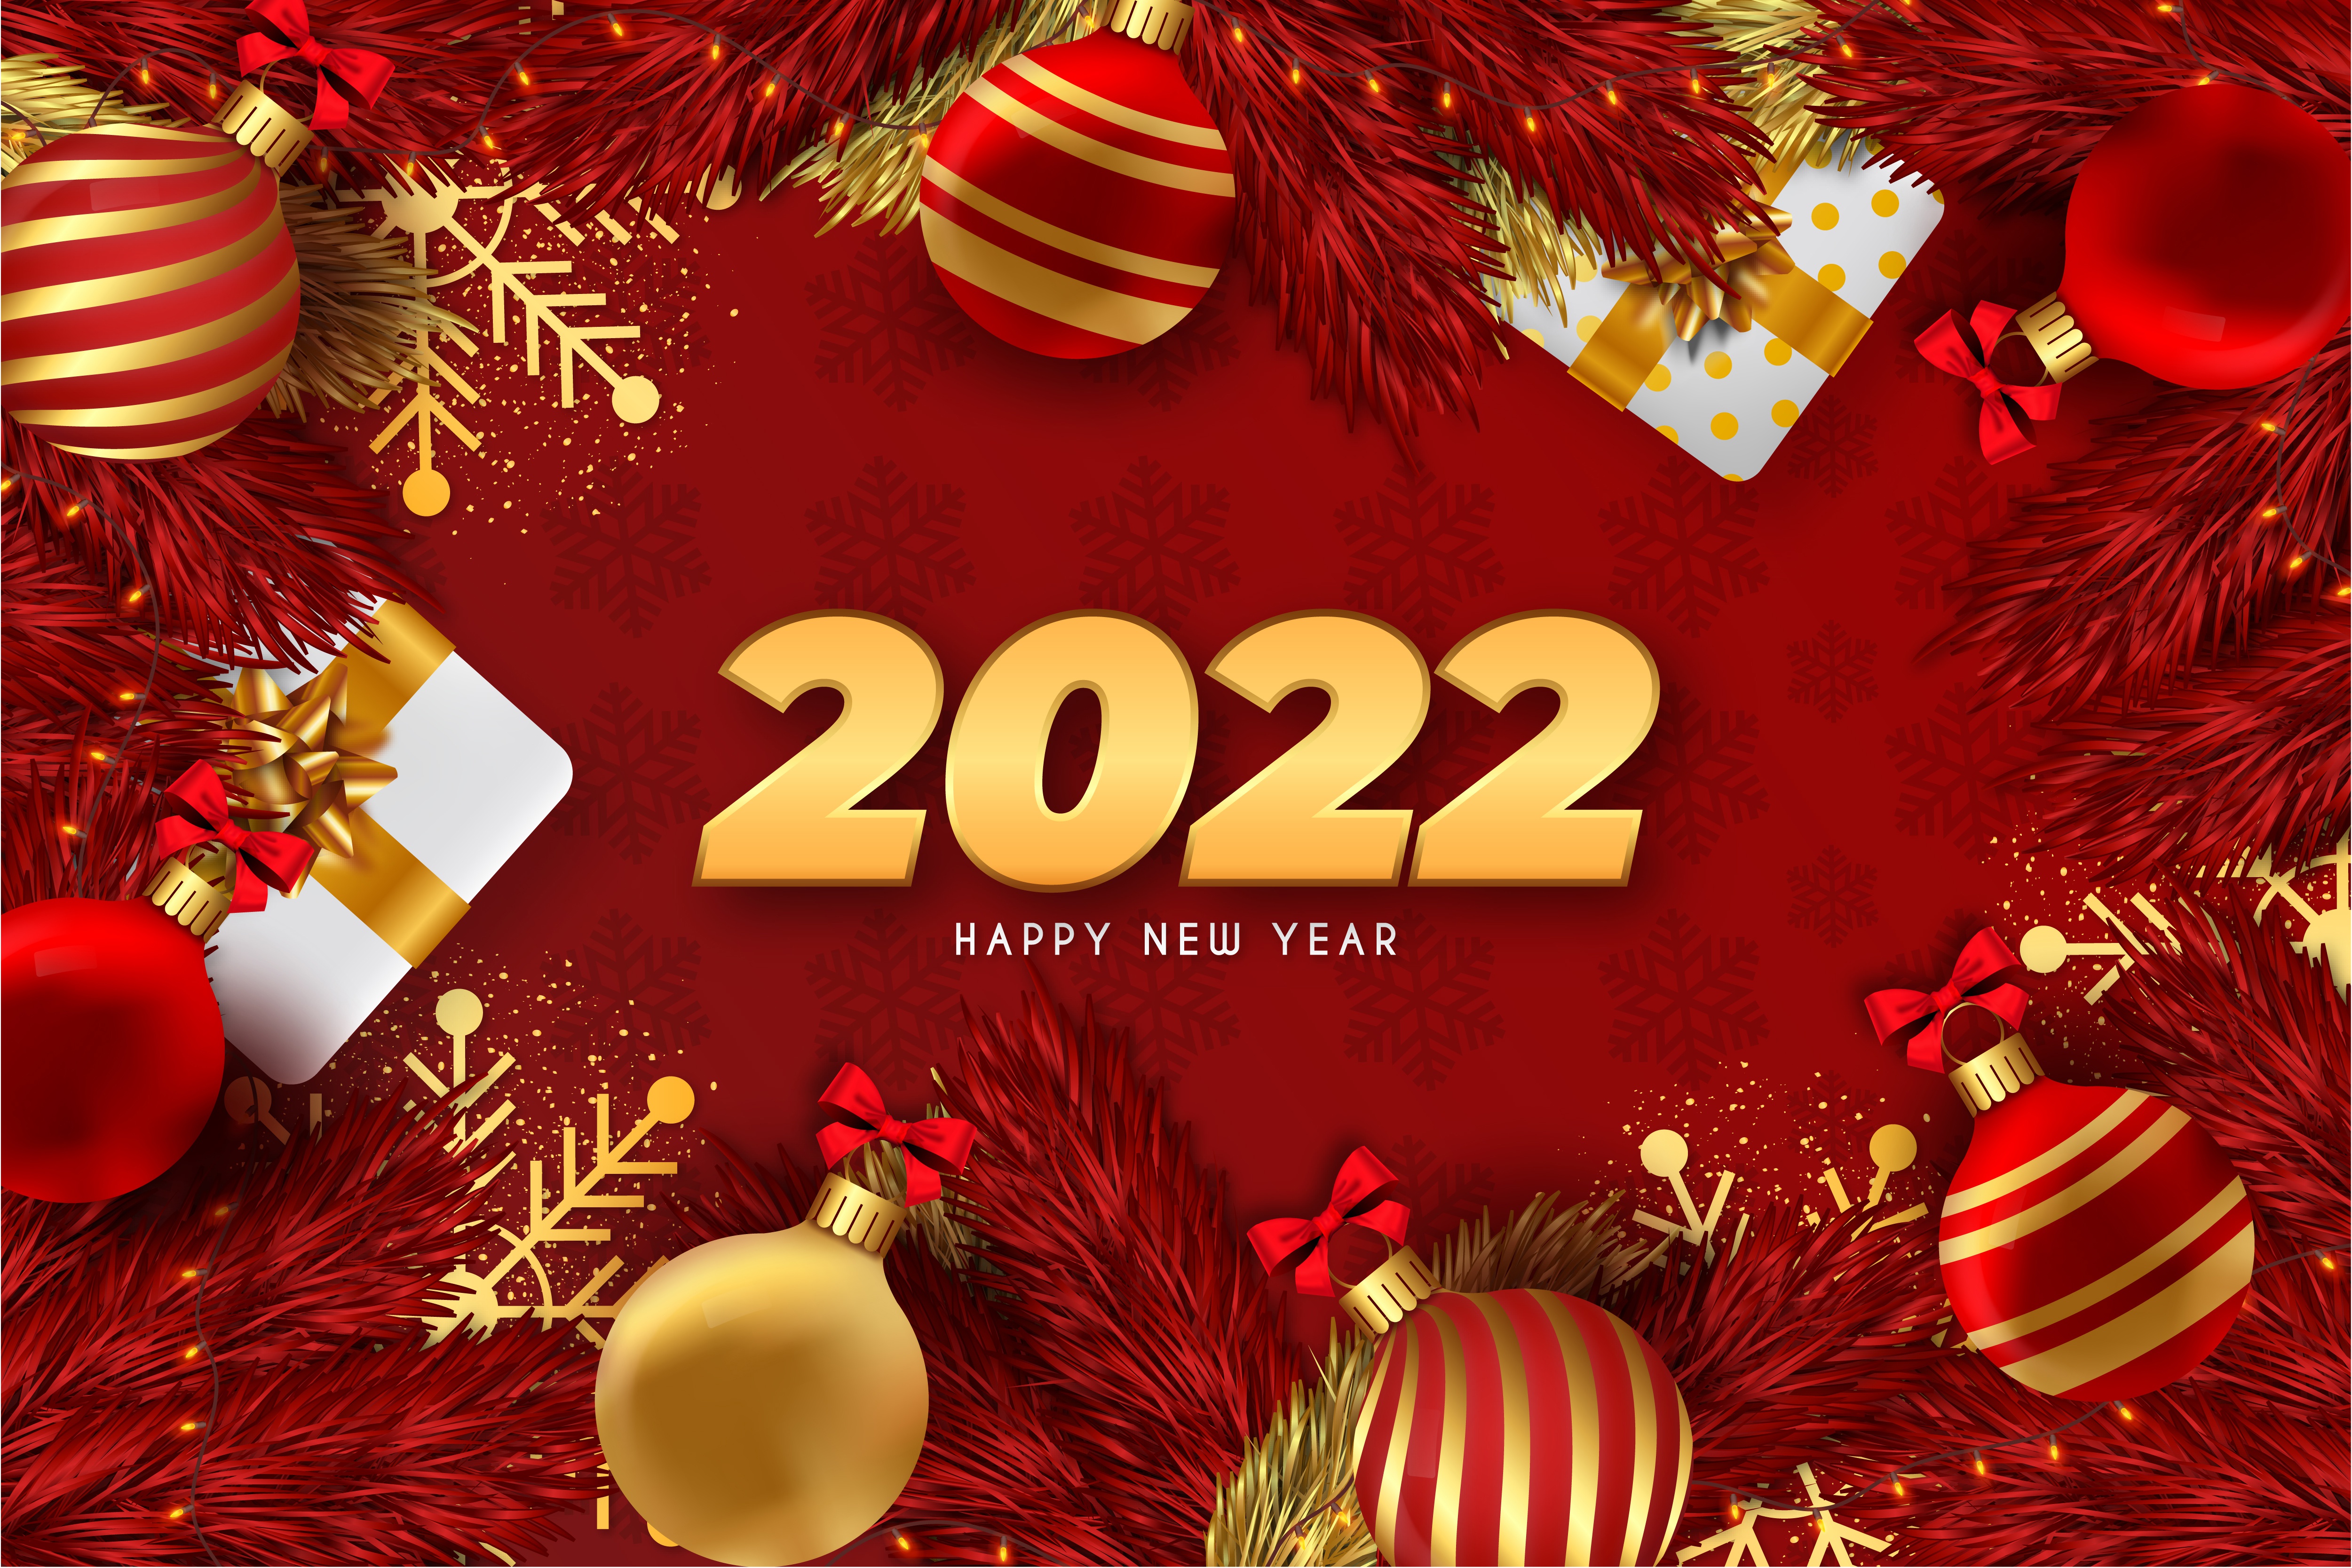 holiday, new year 2022, christmas ornaments, happy new year